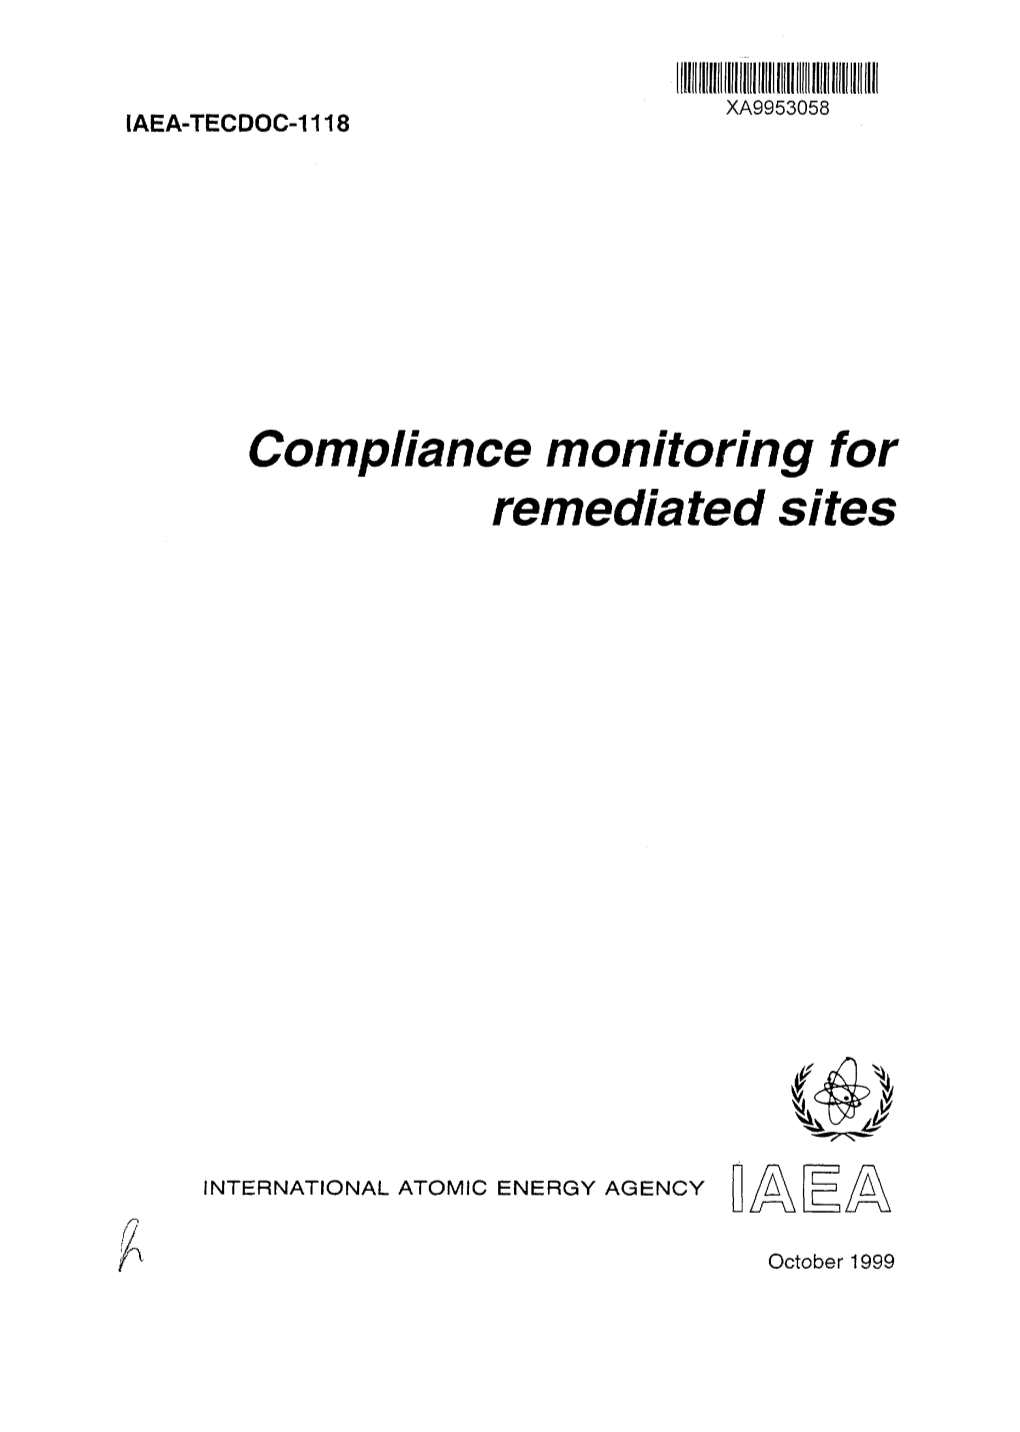 Compliance Monitoring for Remediated Sites